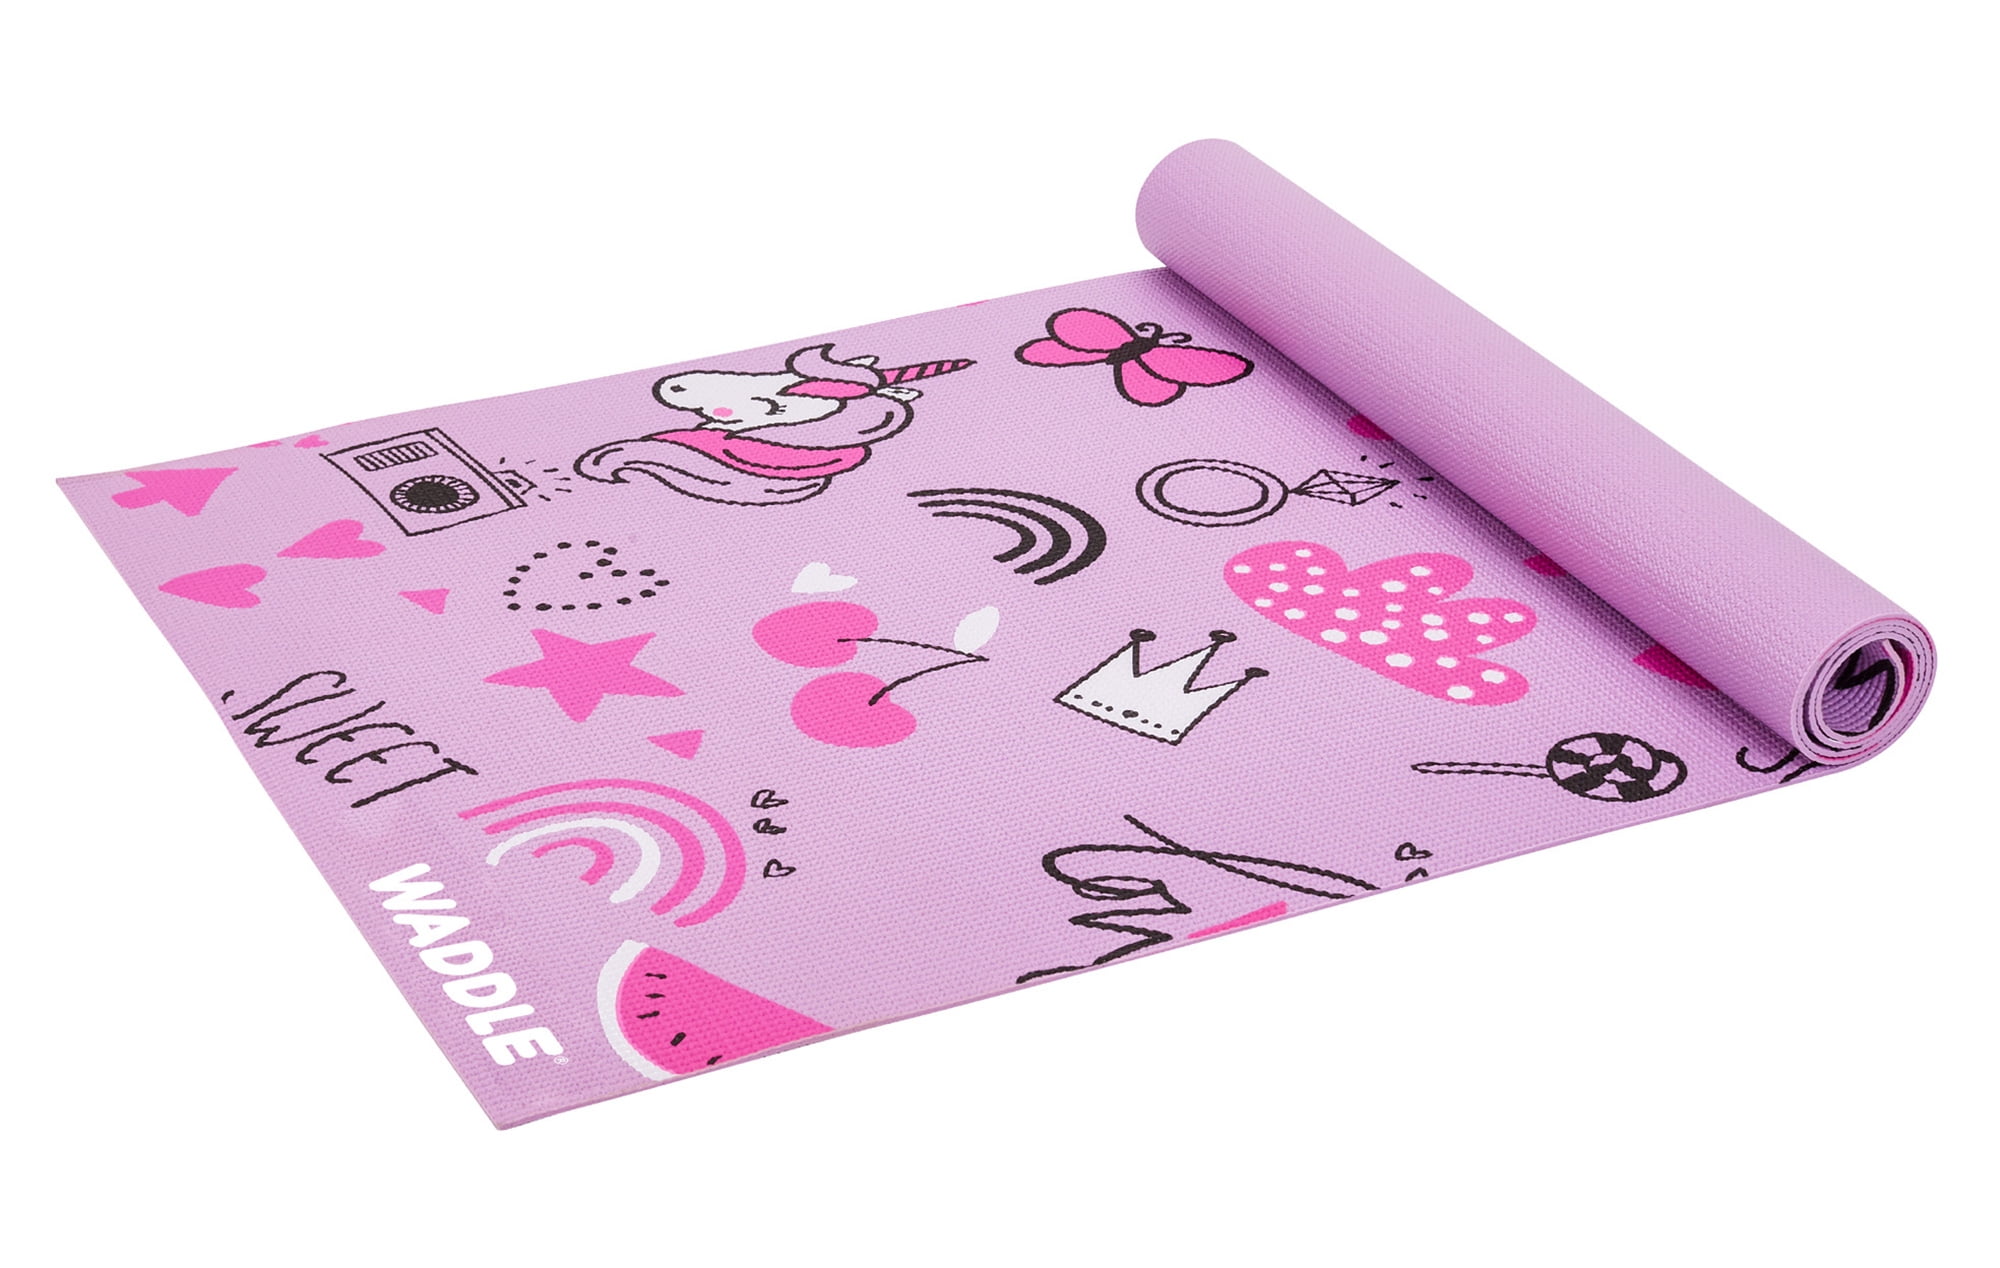 Waddle Yoga Mat, Yoga Mat for Kids, Exercise Mat for Toddlers